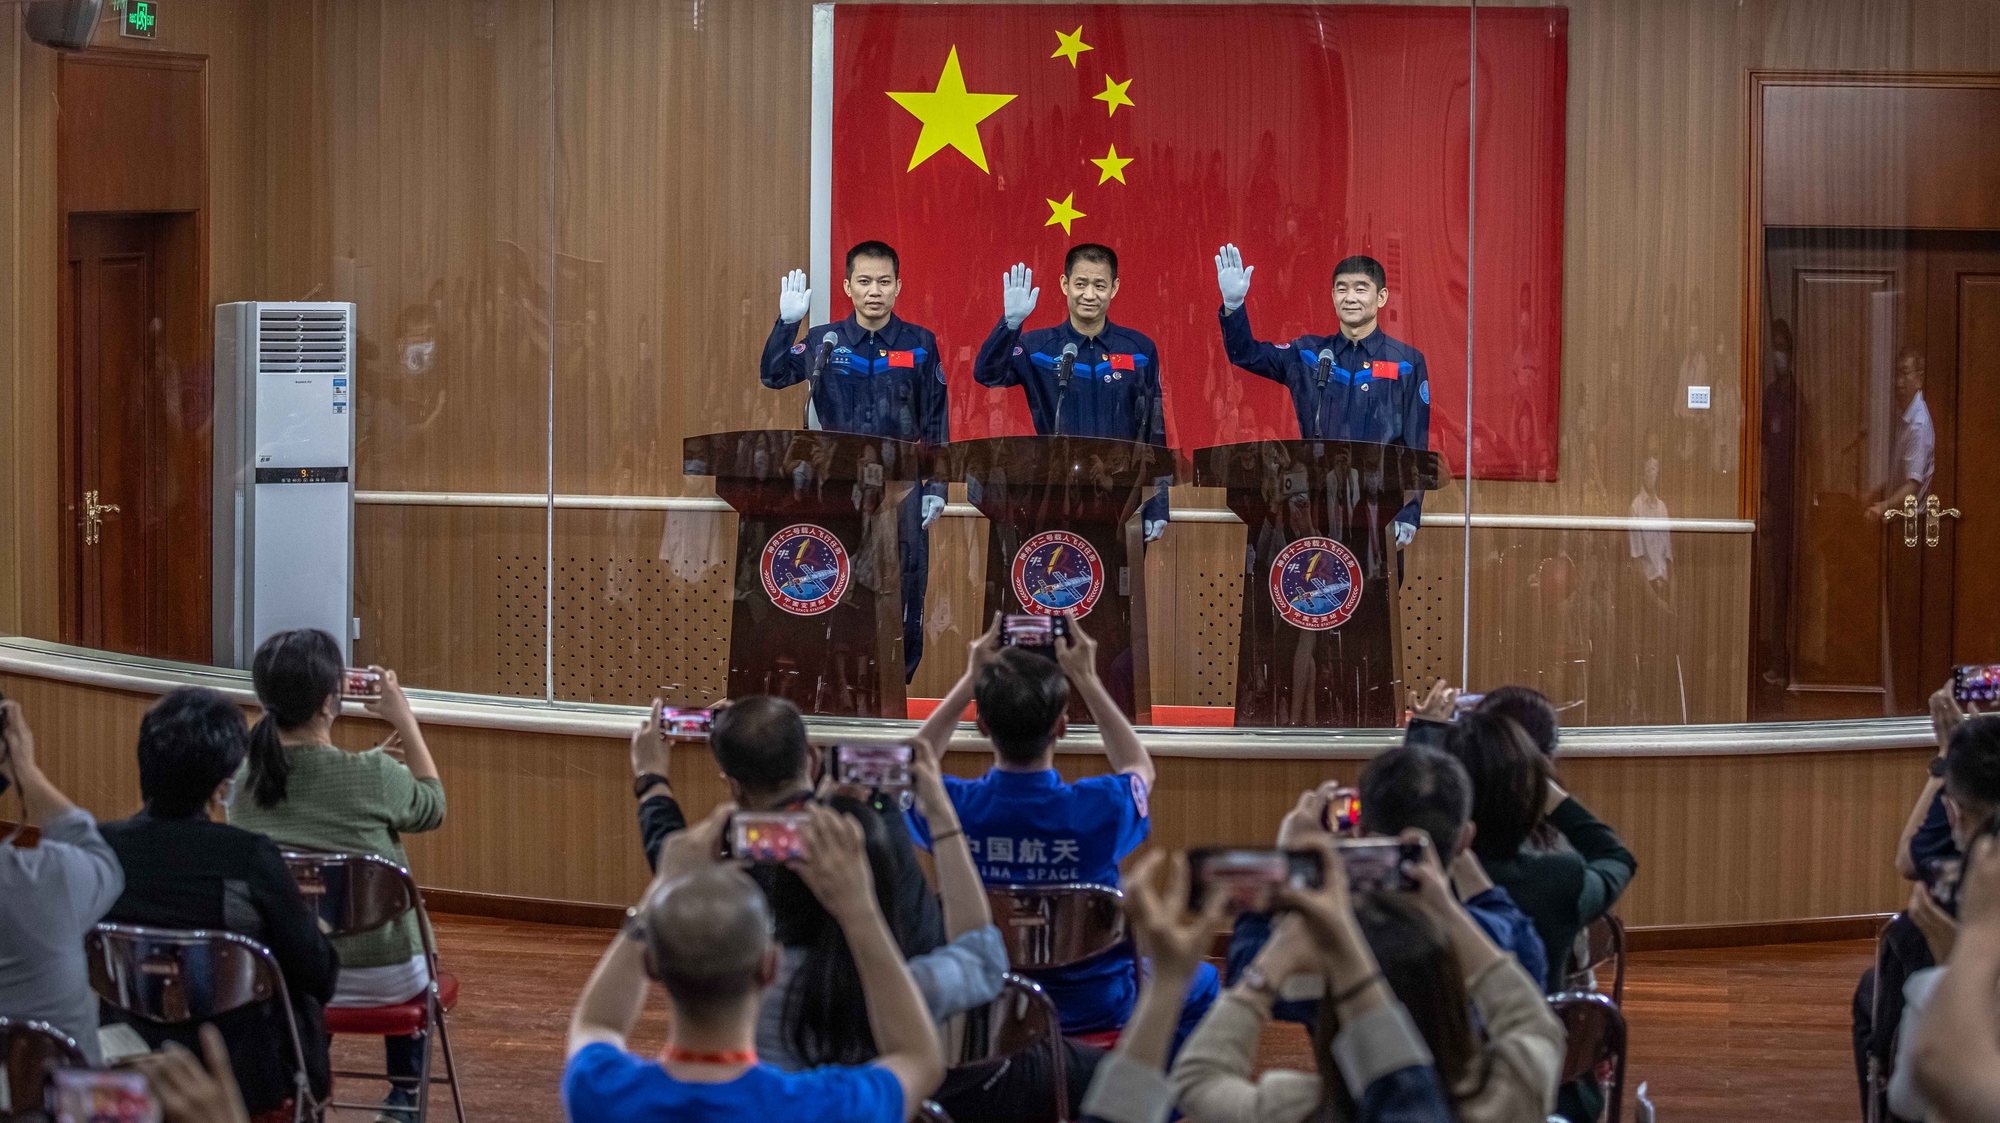 epaselect epa09275128 Chinese astronauts (L-R) Tang Hongbo, Nie Haisheng, and Liu Boming wave during a press conference at the Jiuquan Satellite Launch Center, the day before the launching of the Long March-2F carrier rocket, carrying the Shenzhou-12, in northwestern Gansu province, China, 16 June 2021. China will launch the Shenzhou-12 spacecraft carrying three crew members to the orbiting Tianhe core module for a three-month mission on 17 June. It is the first spaceflight in almost five years when China sends humans into space.  EPA/ROMAN PILIPEY